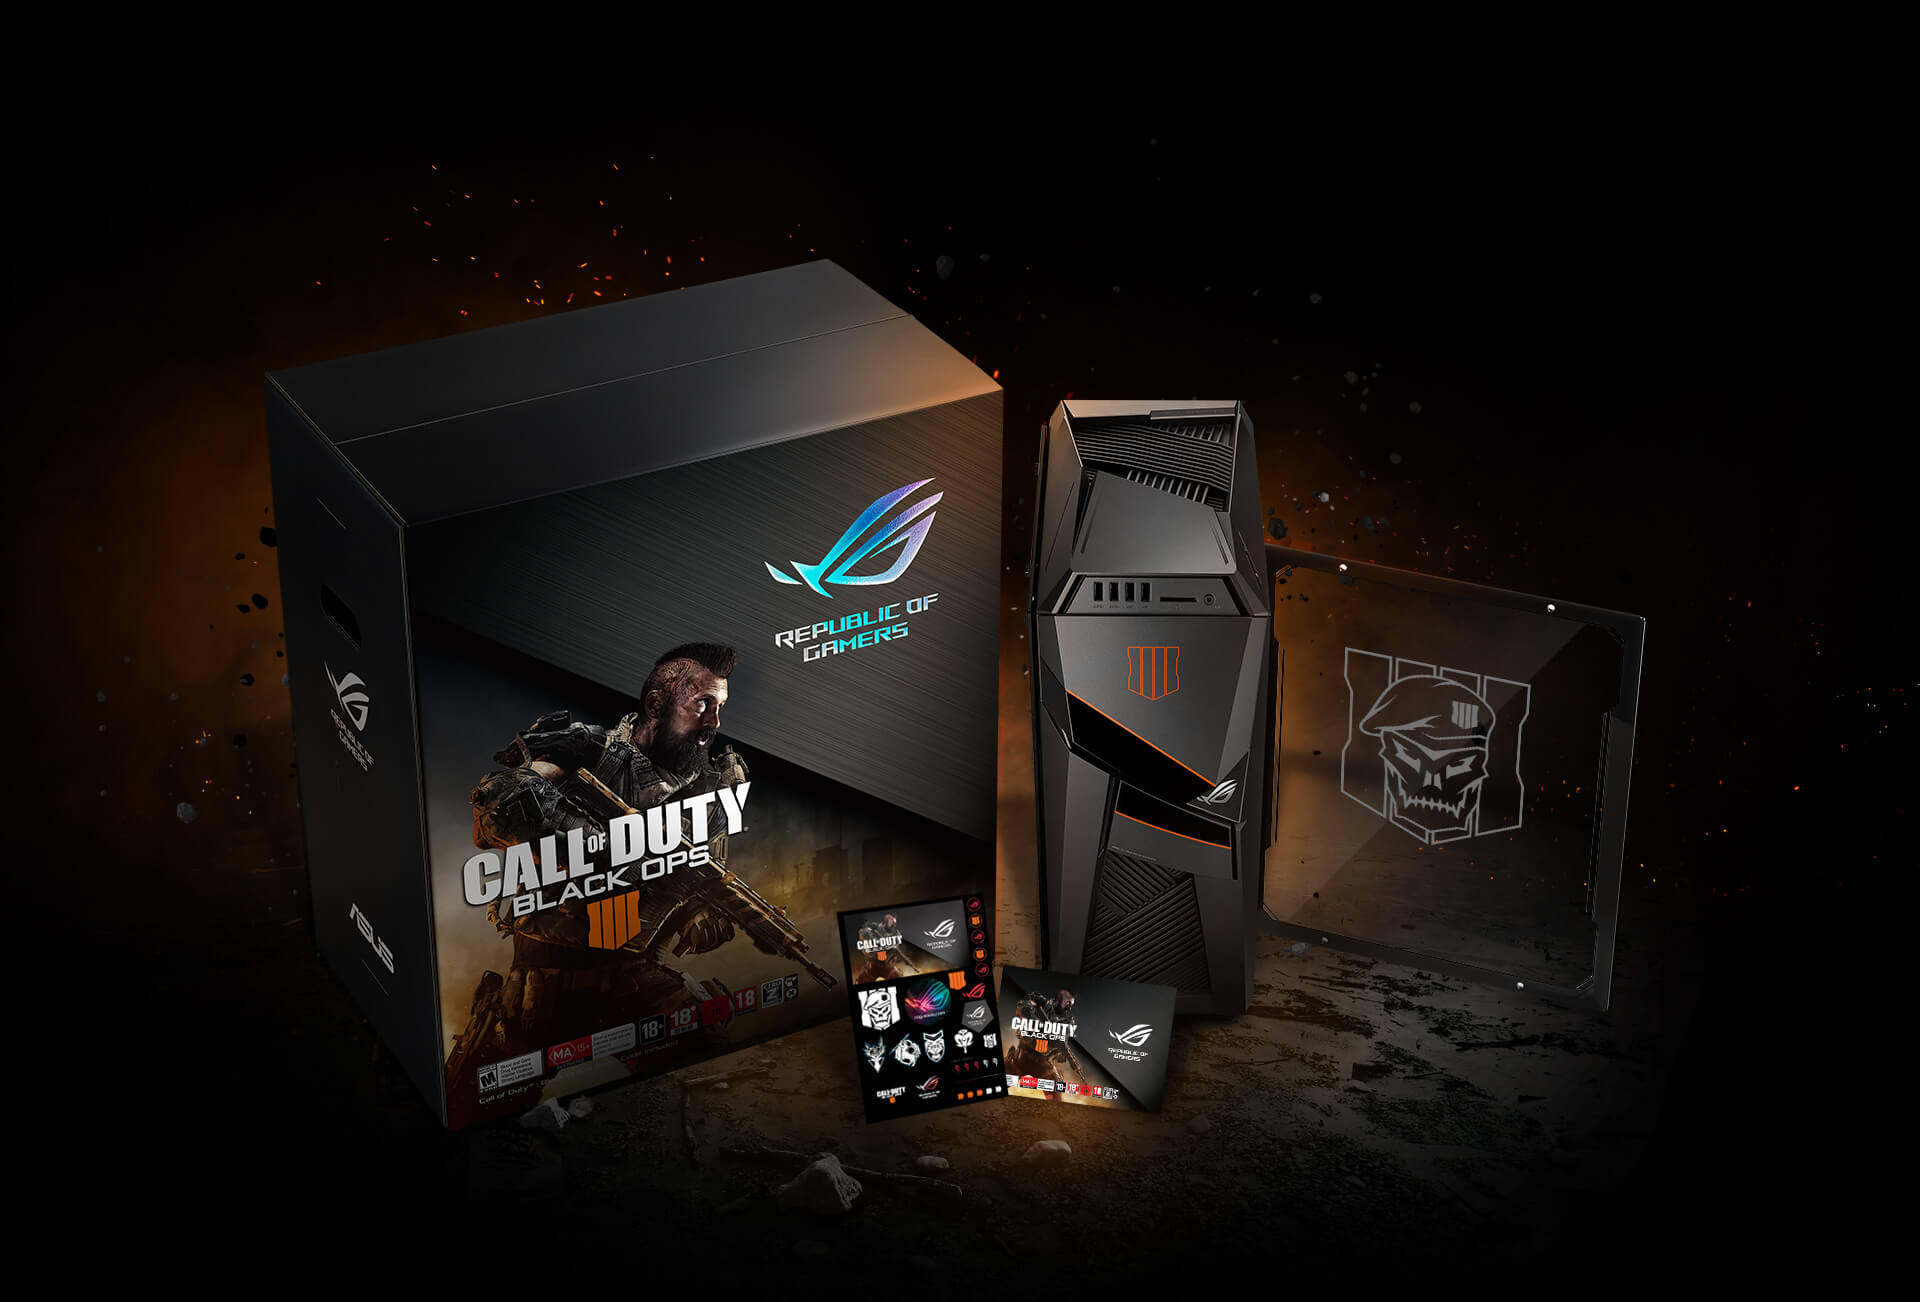 The desktop and package of ROG Strix GL12 Call of Duty are placed on the ground